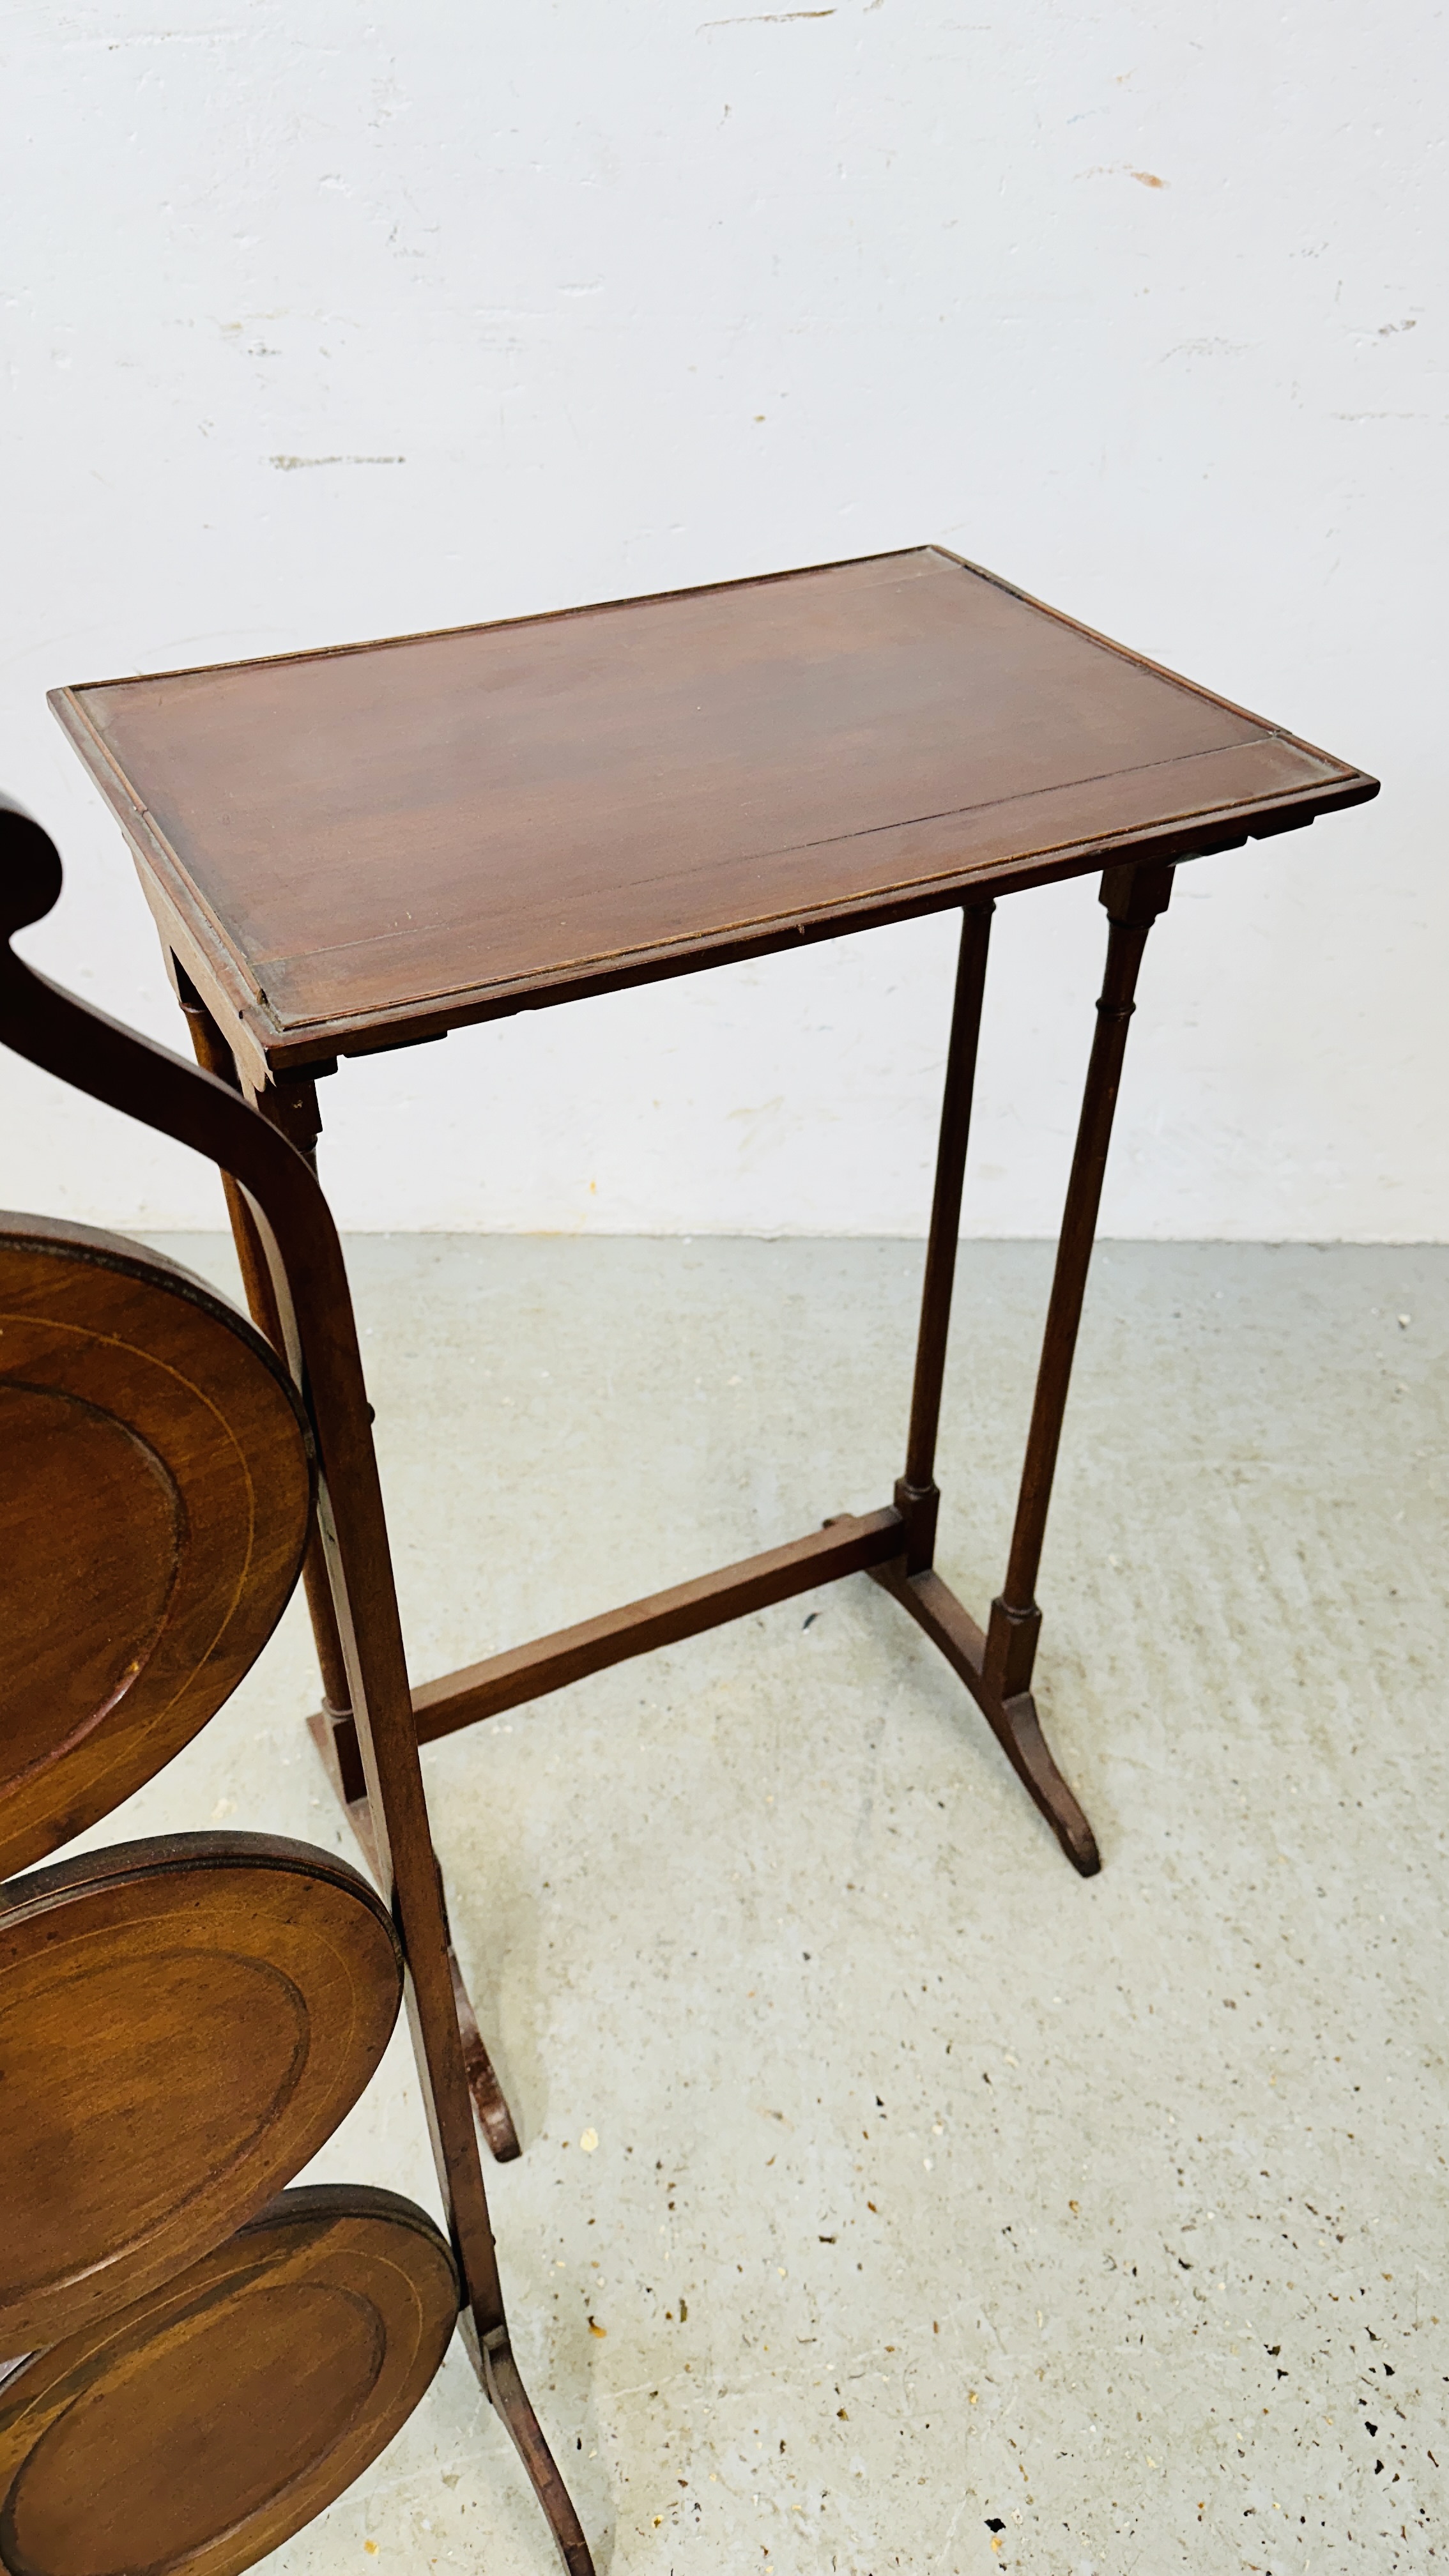 A FOLDING CAKE STAND ALONG WITH MAHOGNY OCCASIONAL TABLE, ONE OF A QUATTETO SET. - Image 7 of 10